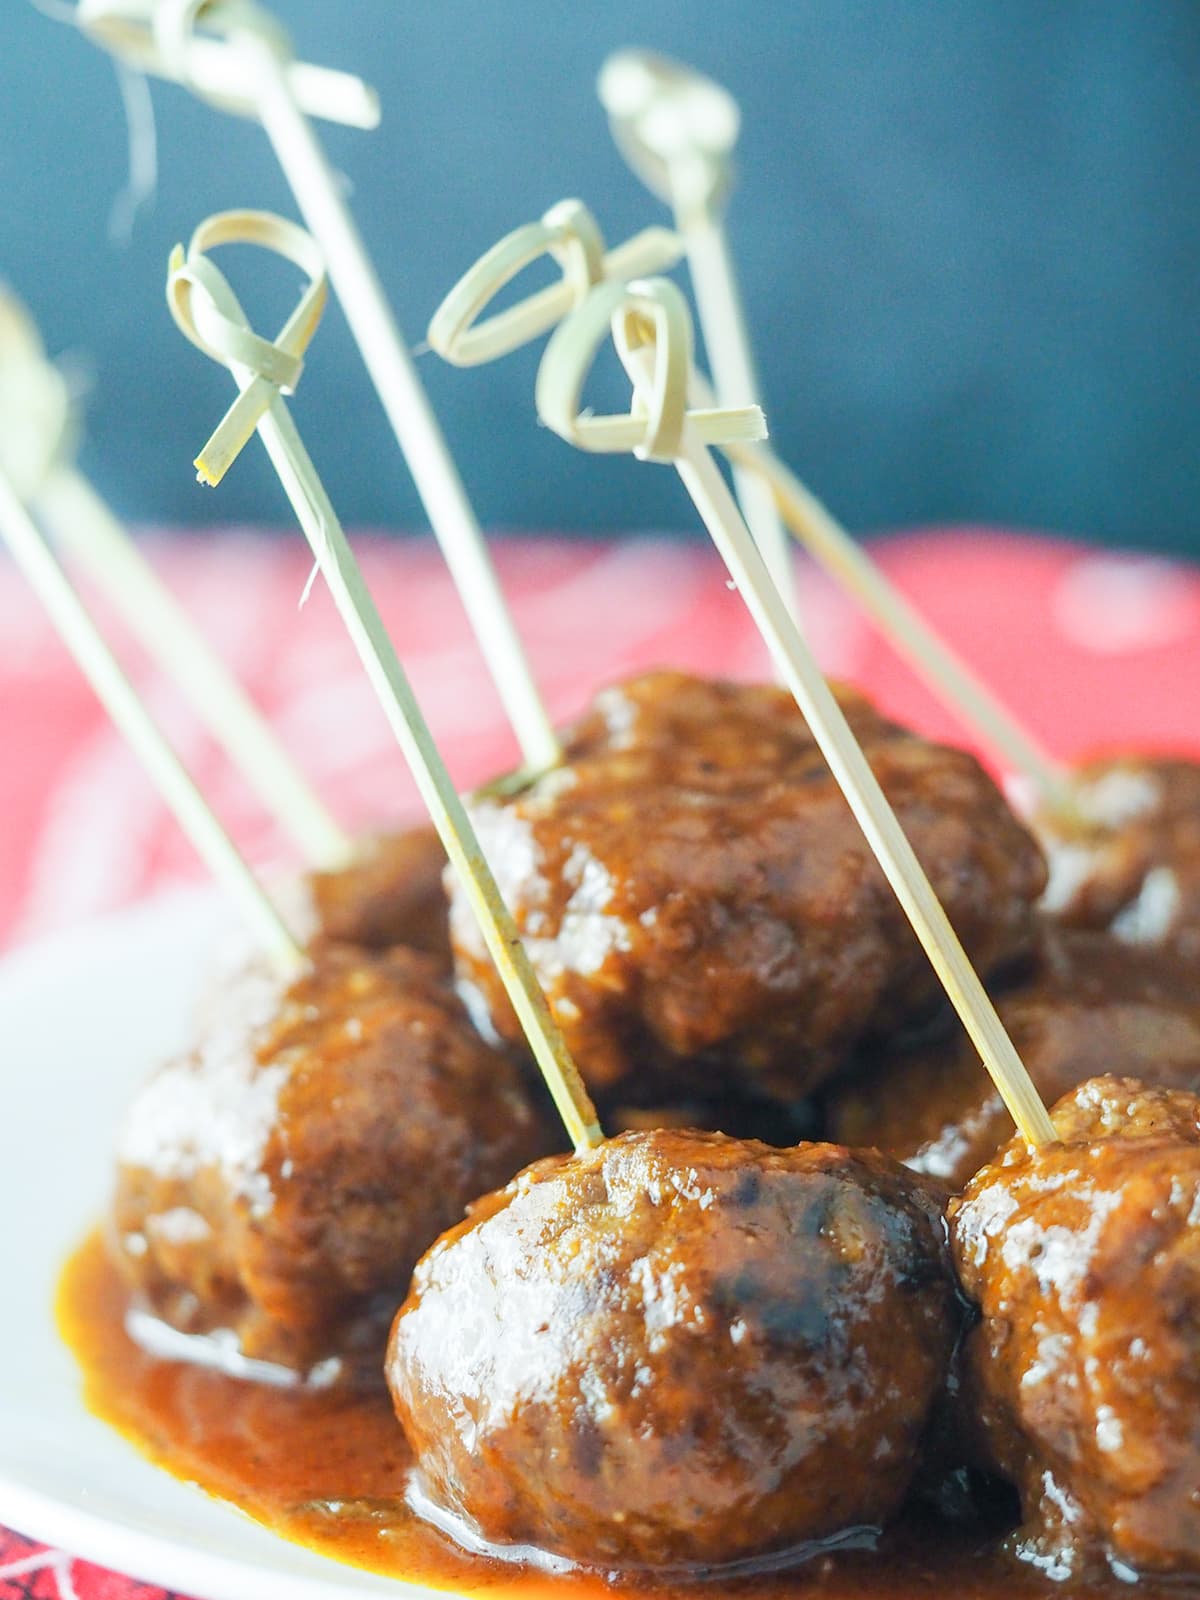 Tailgate "grape jelly" meatballs at Monday is Meatloaf